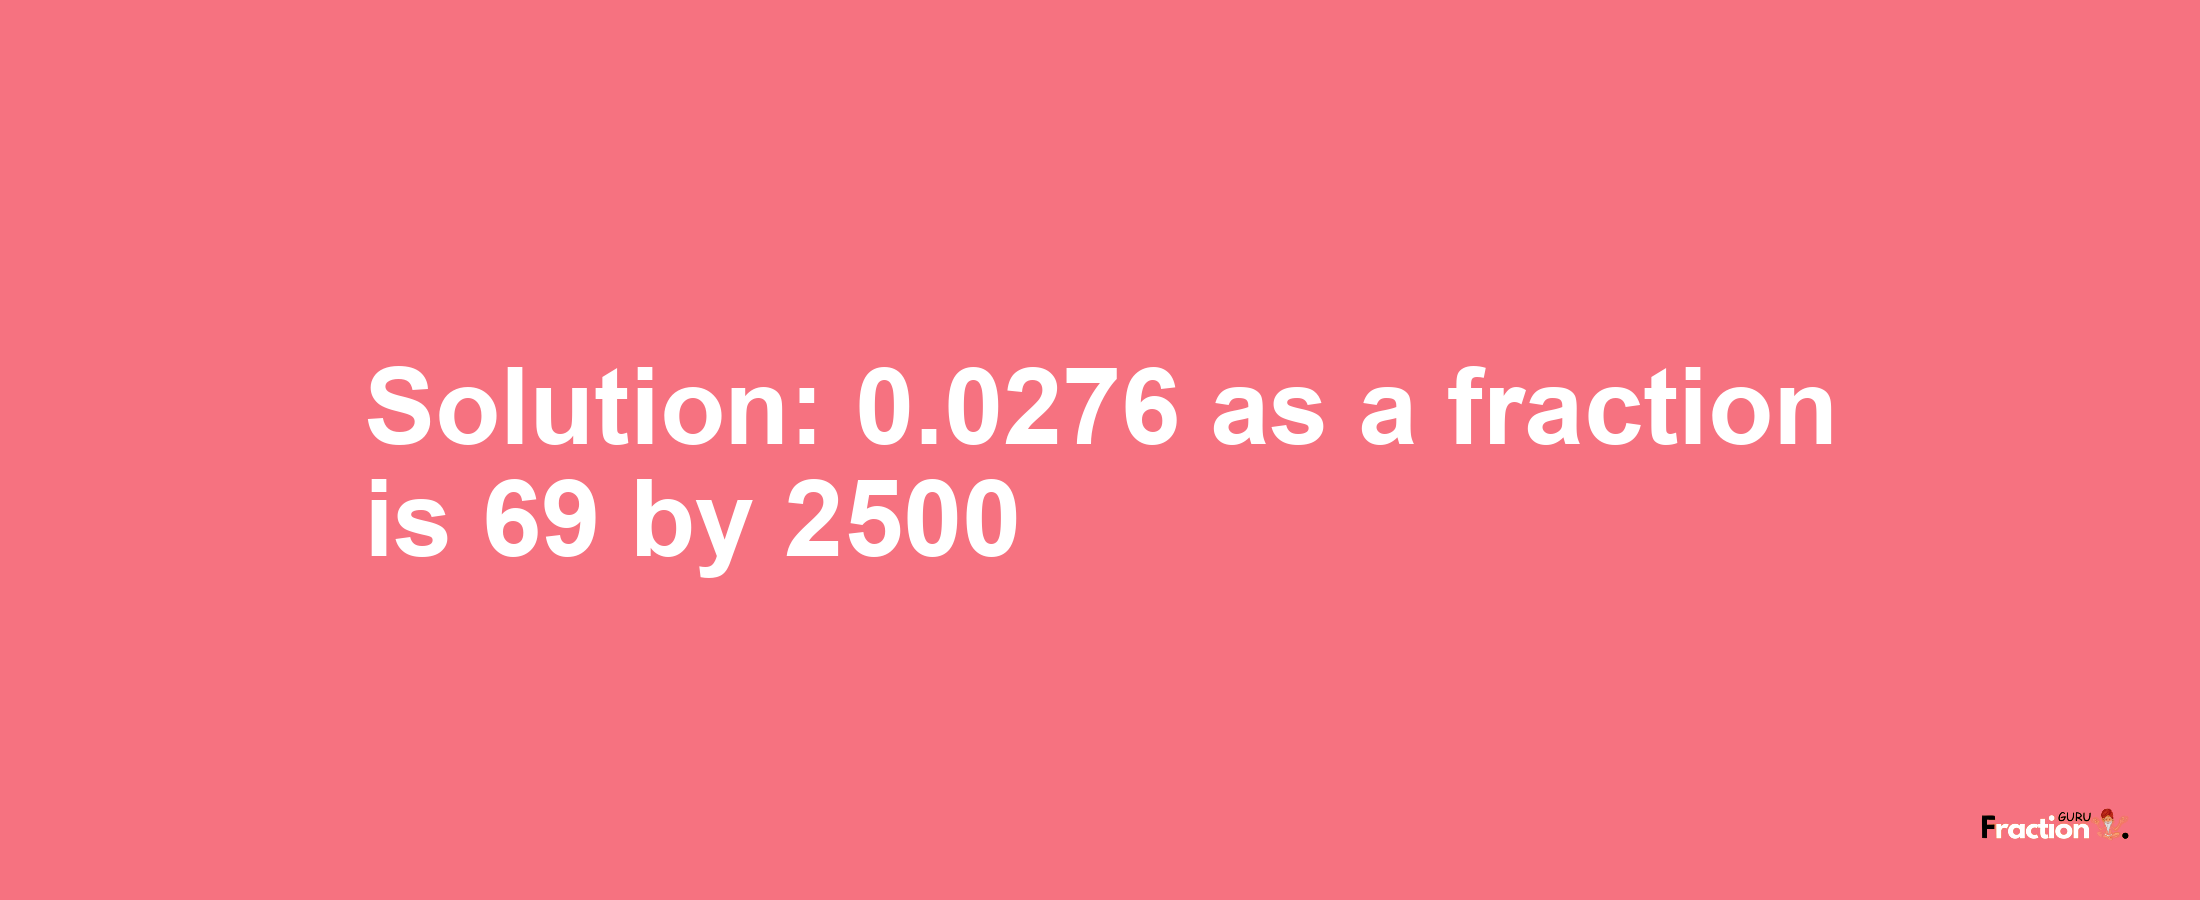 Solution:0.0276 as a fraction is 69/2500